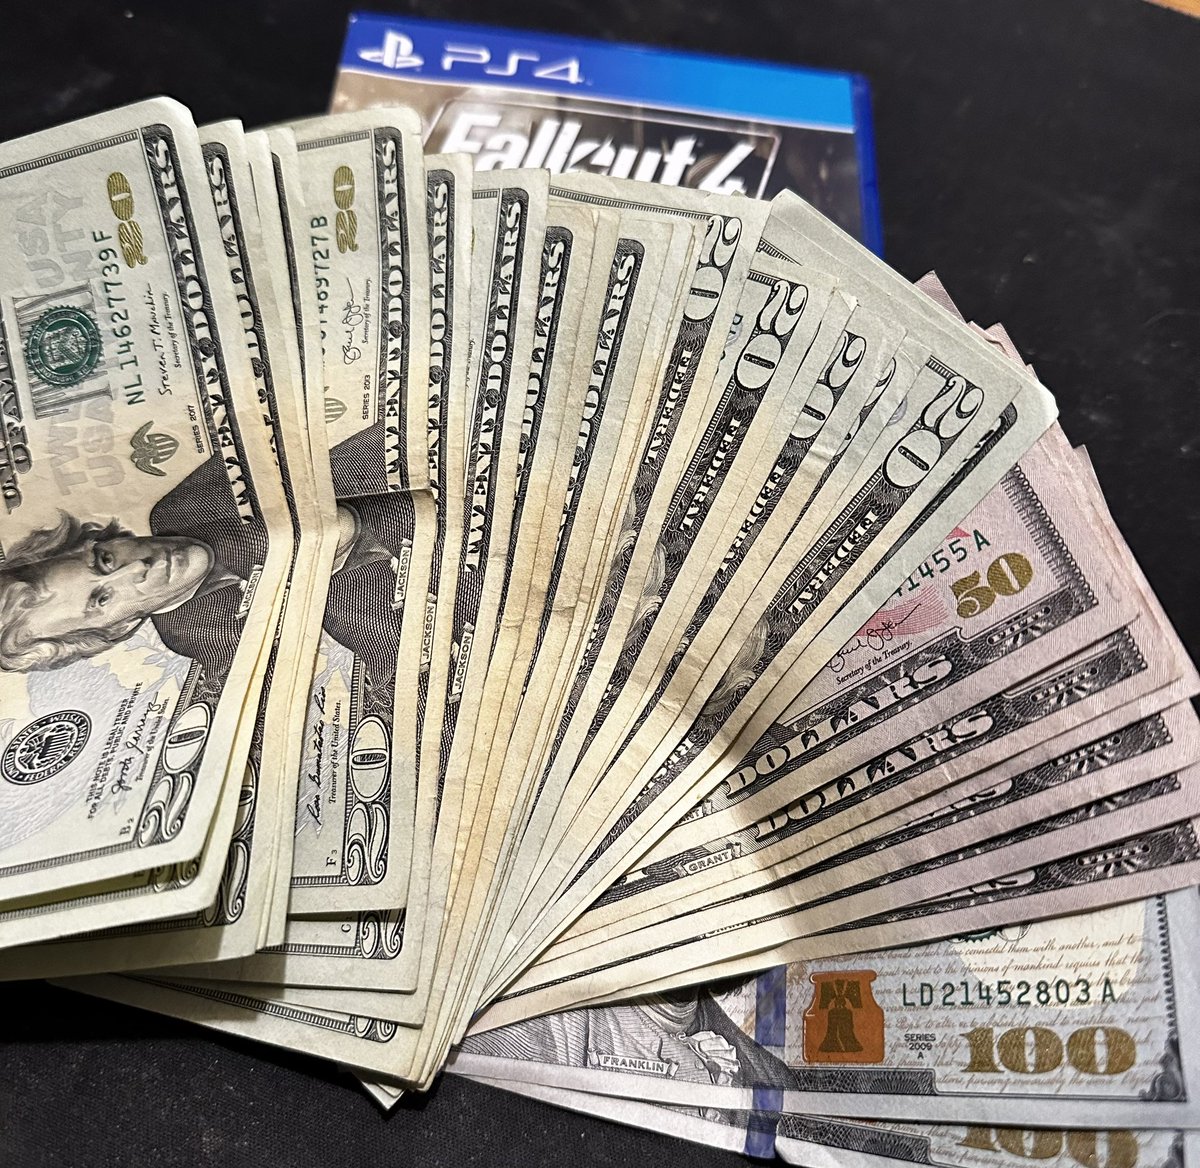 Yep. I saved all this money just by not buying Fallout 4 on the PSN.